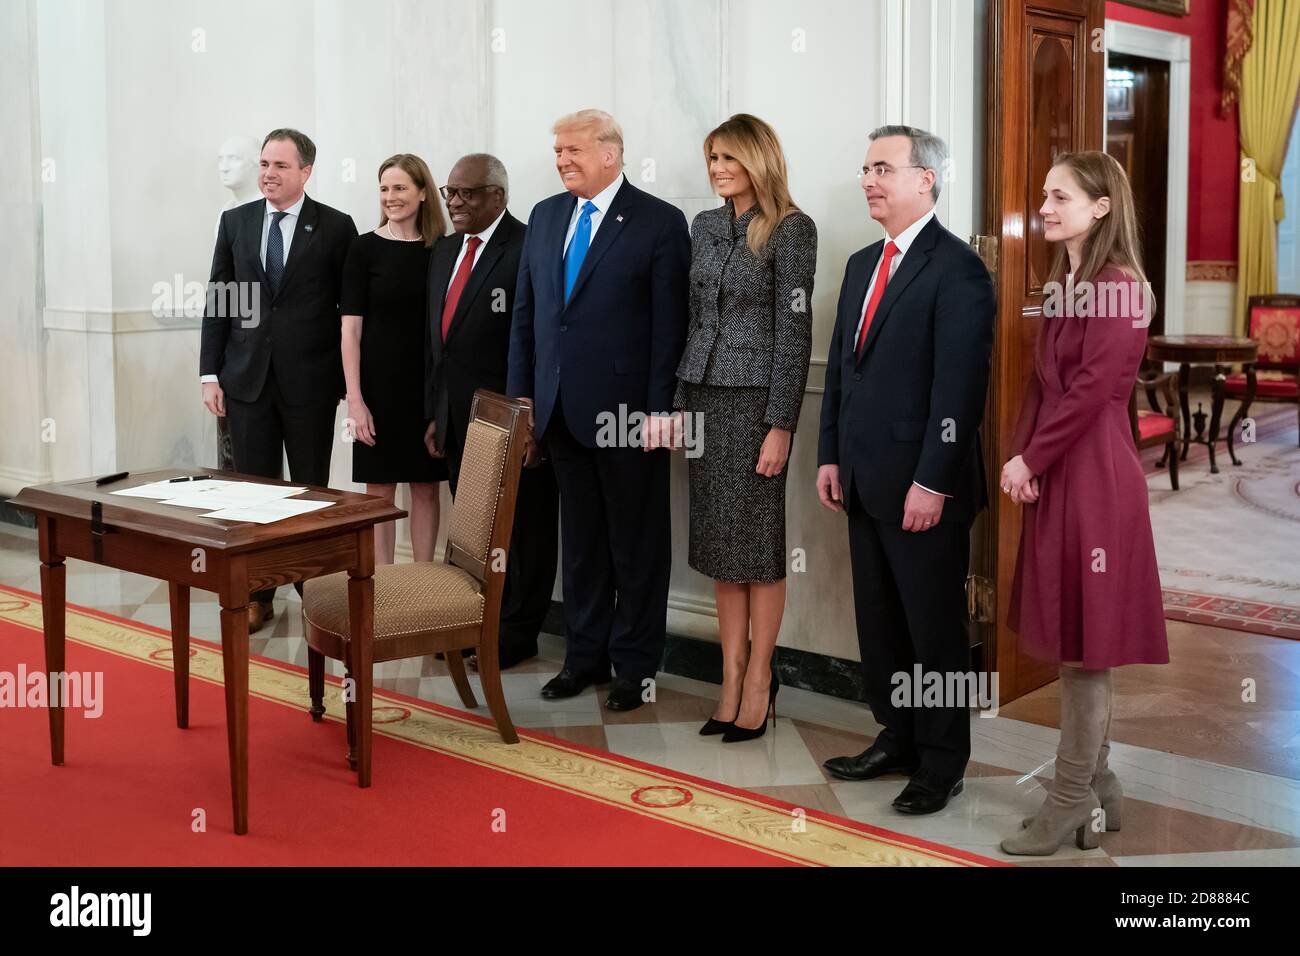 The Swearing-in Ceremony of the Honorable Amy Coney Barrett as Associate Justice of the US Supreme Court Stock Photo